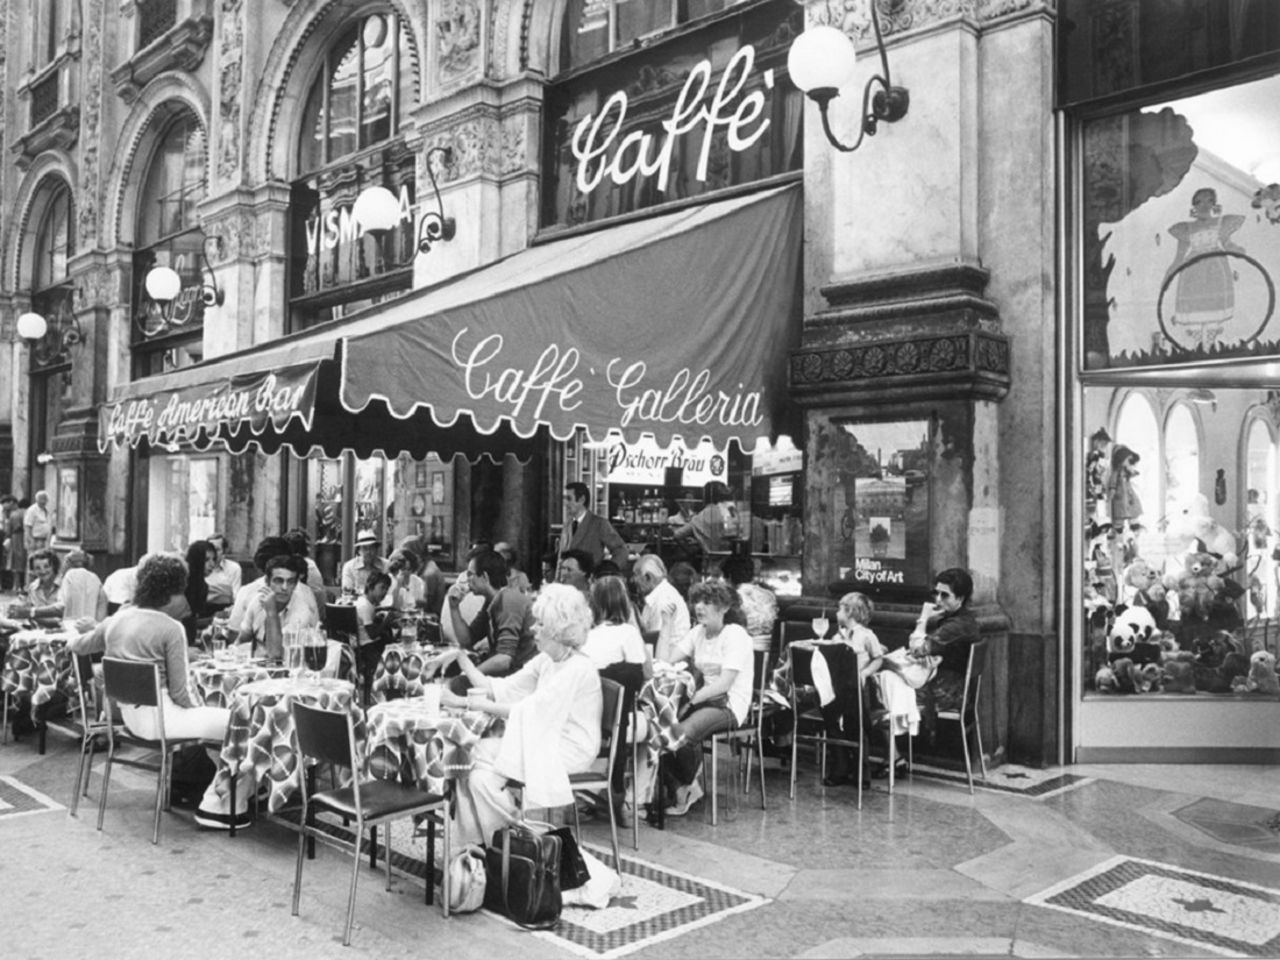 The design of Bar Luce echoes the architecture of the Galleria Vittorio Emanuele in Milan. Here, a shot of the café in the Galleria from 1978.